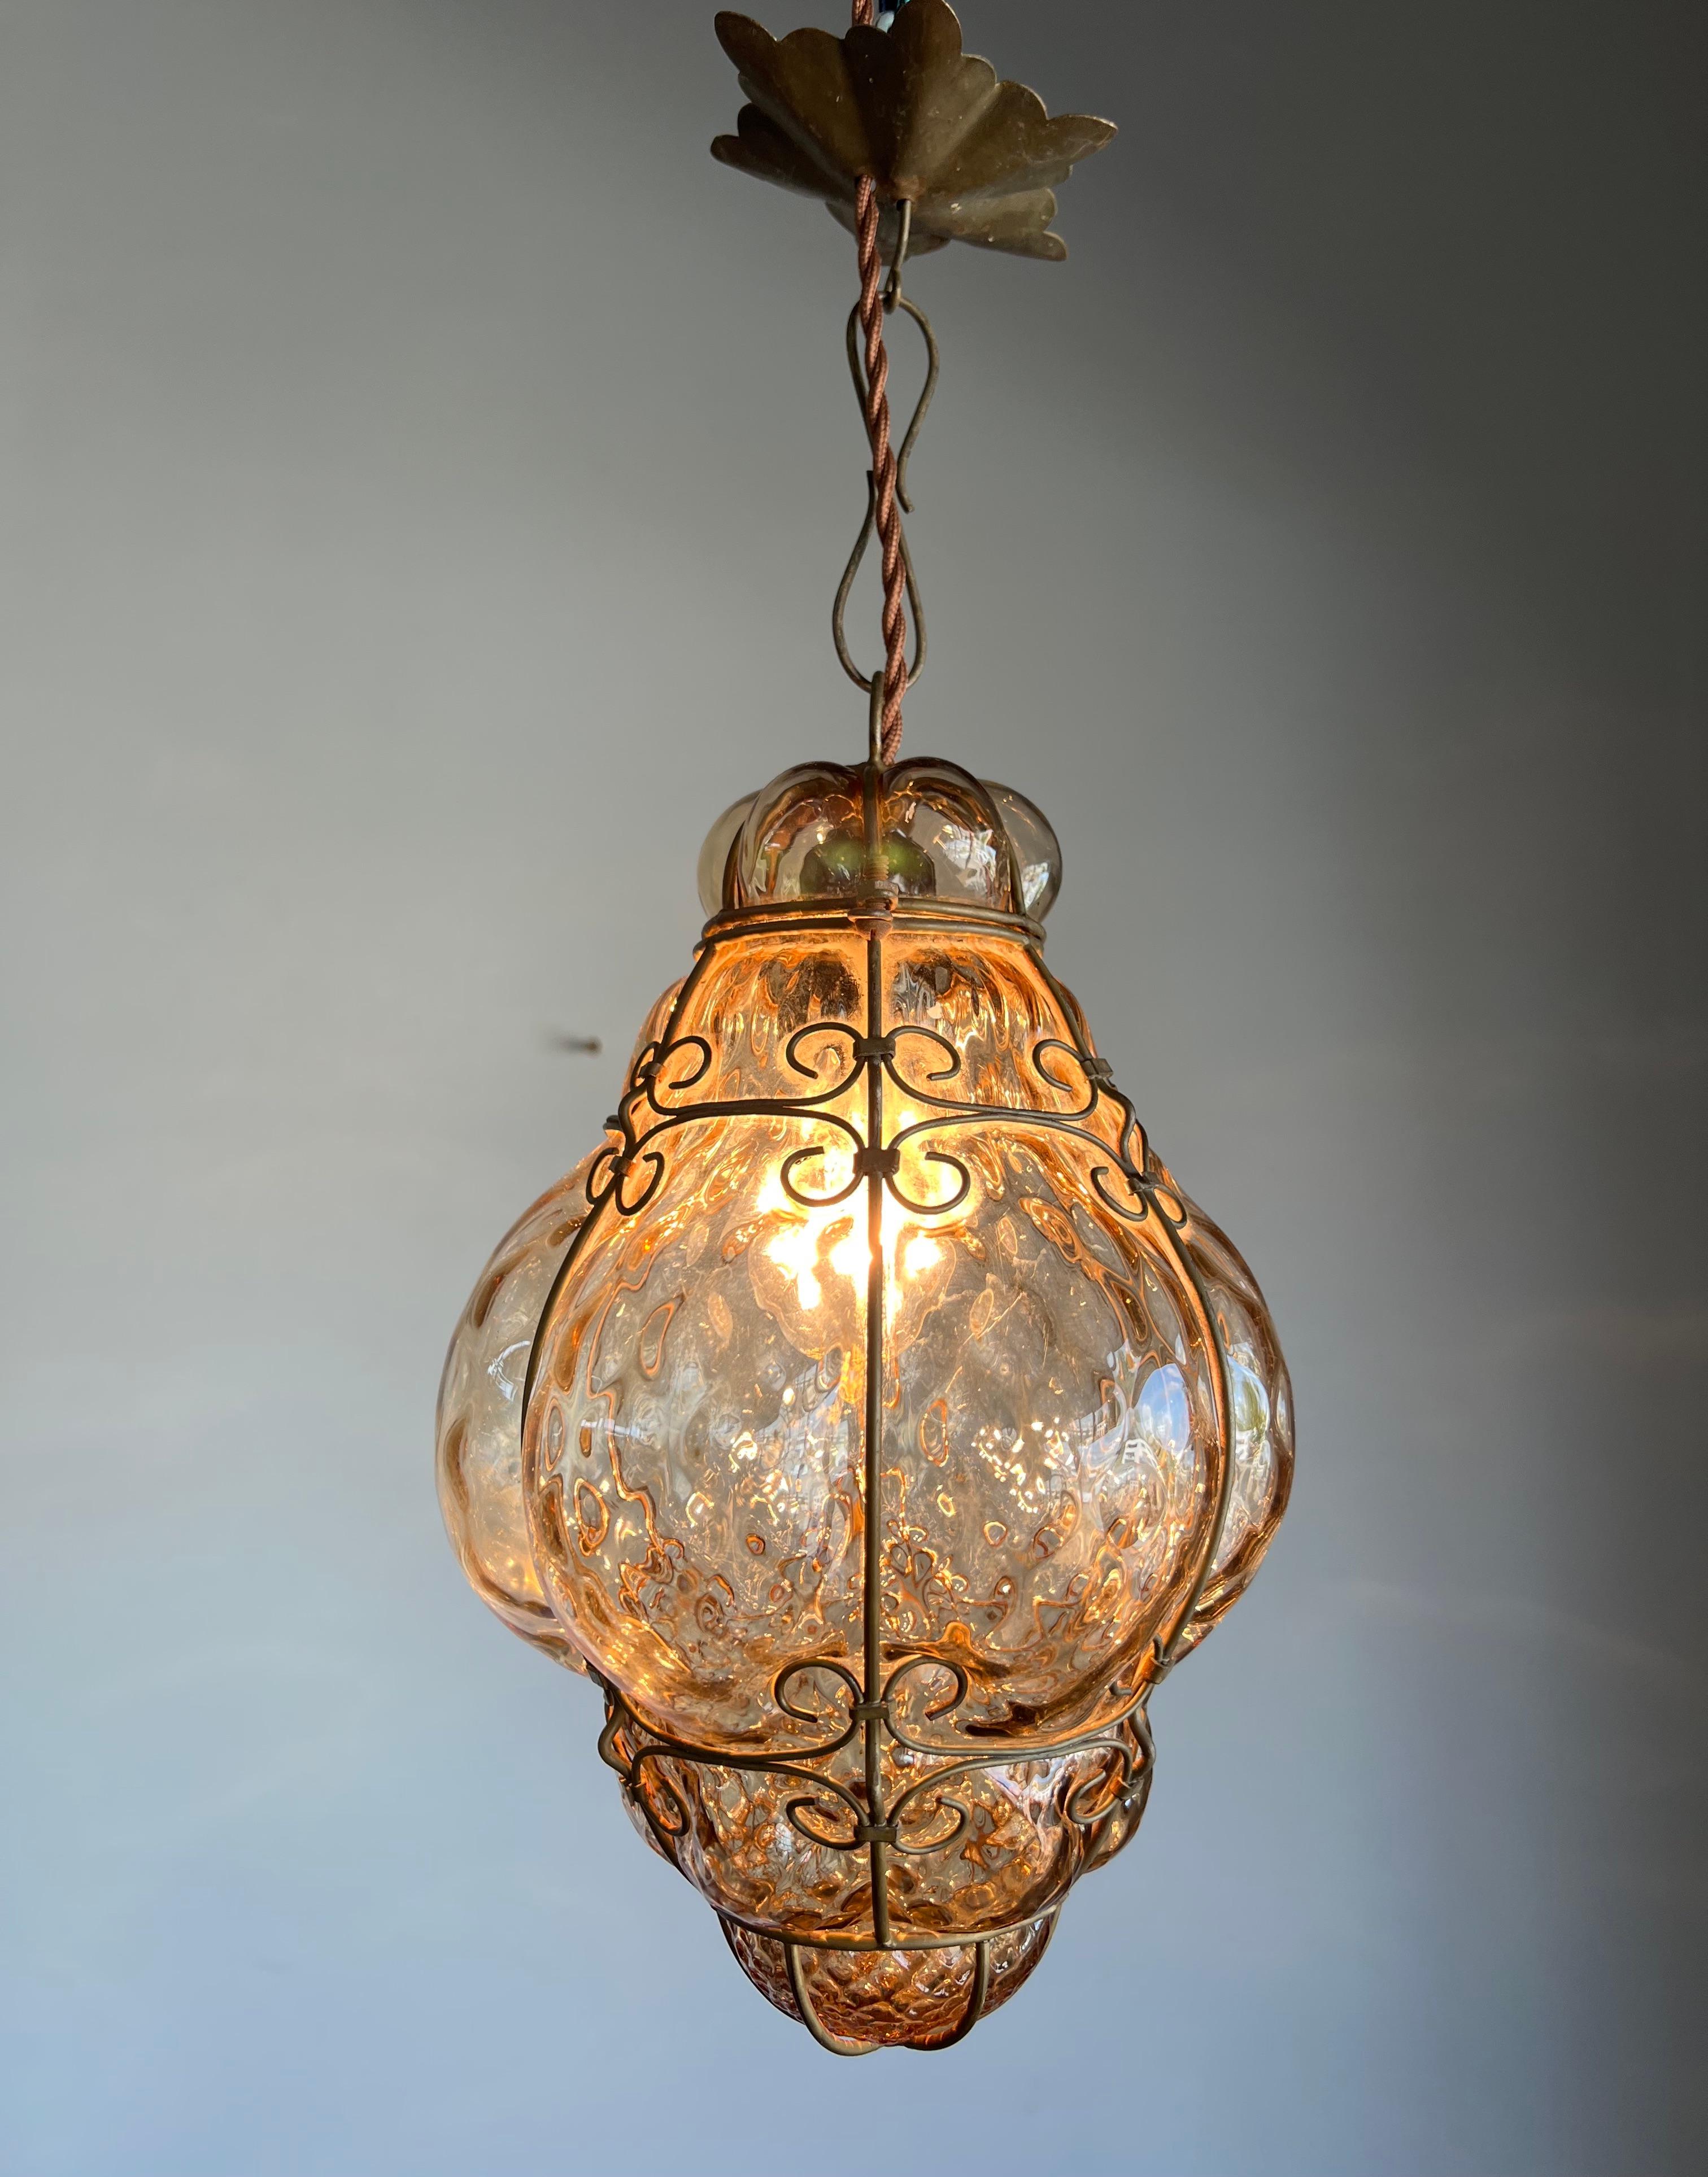 Italian Small Antique Venetian Mouth Blown Smoked Glass Art in Iron Frame Pendant Light For Sale